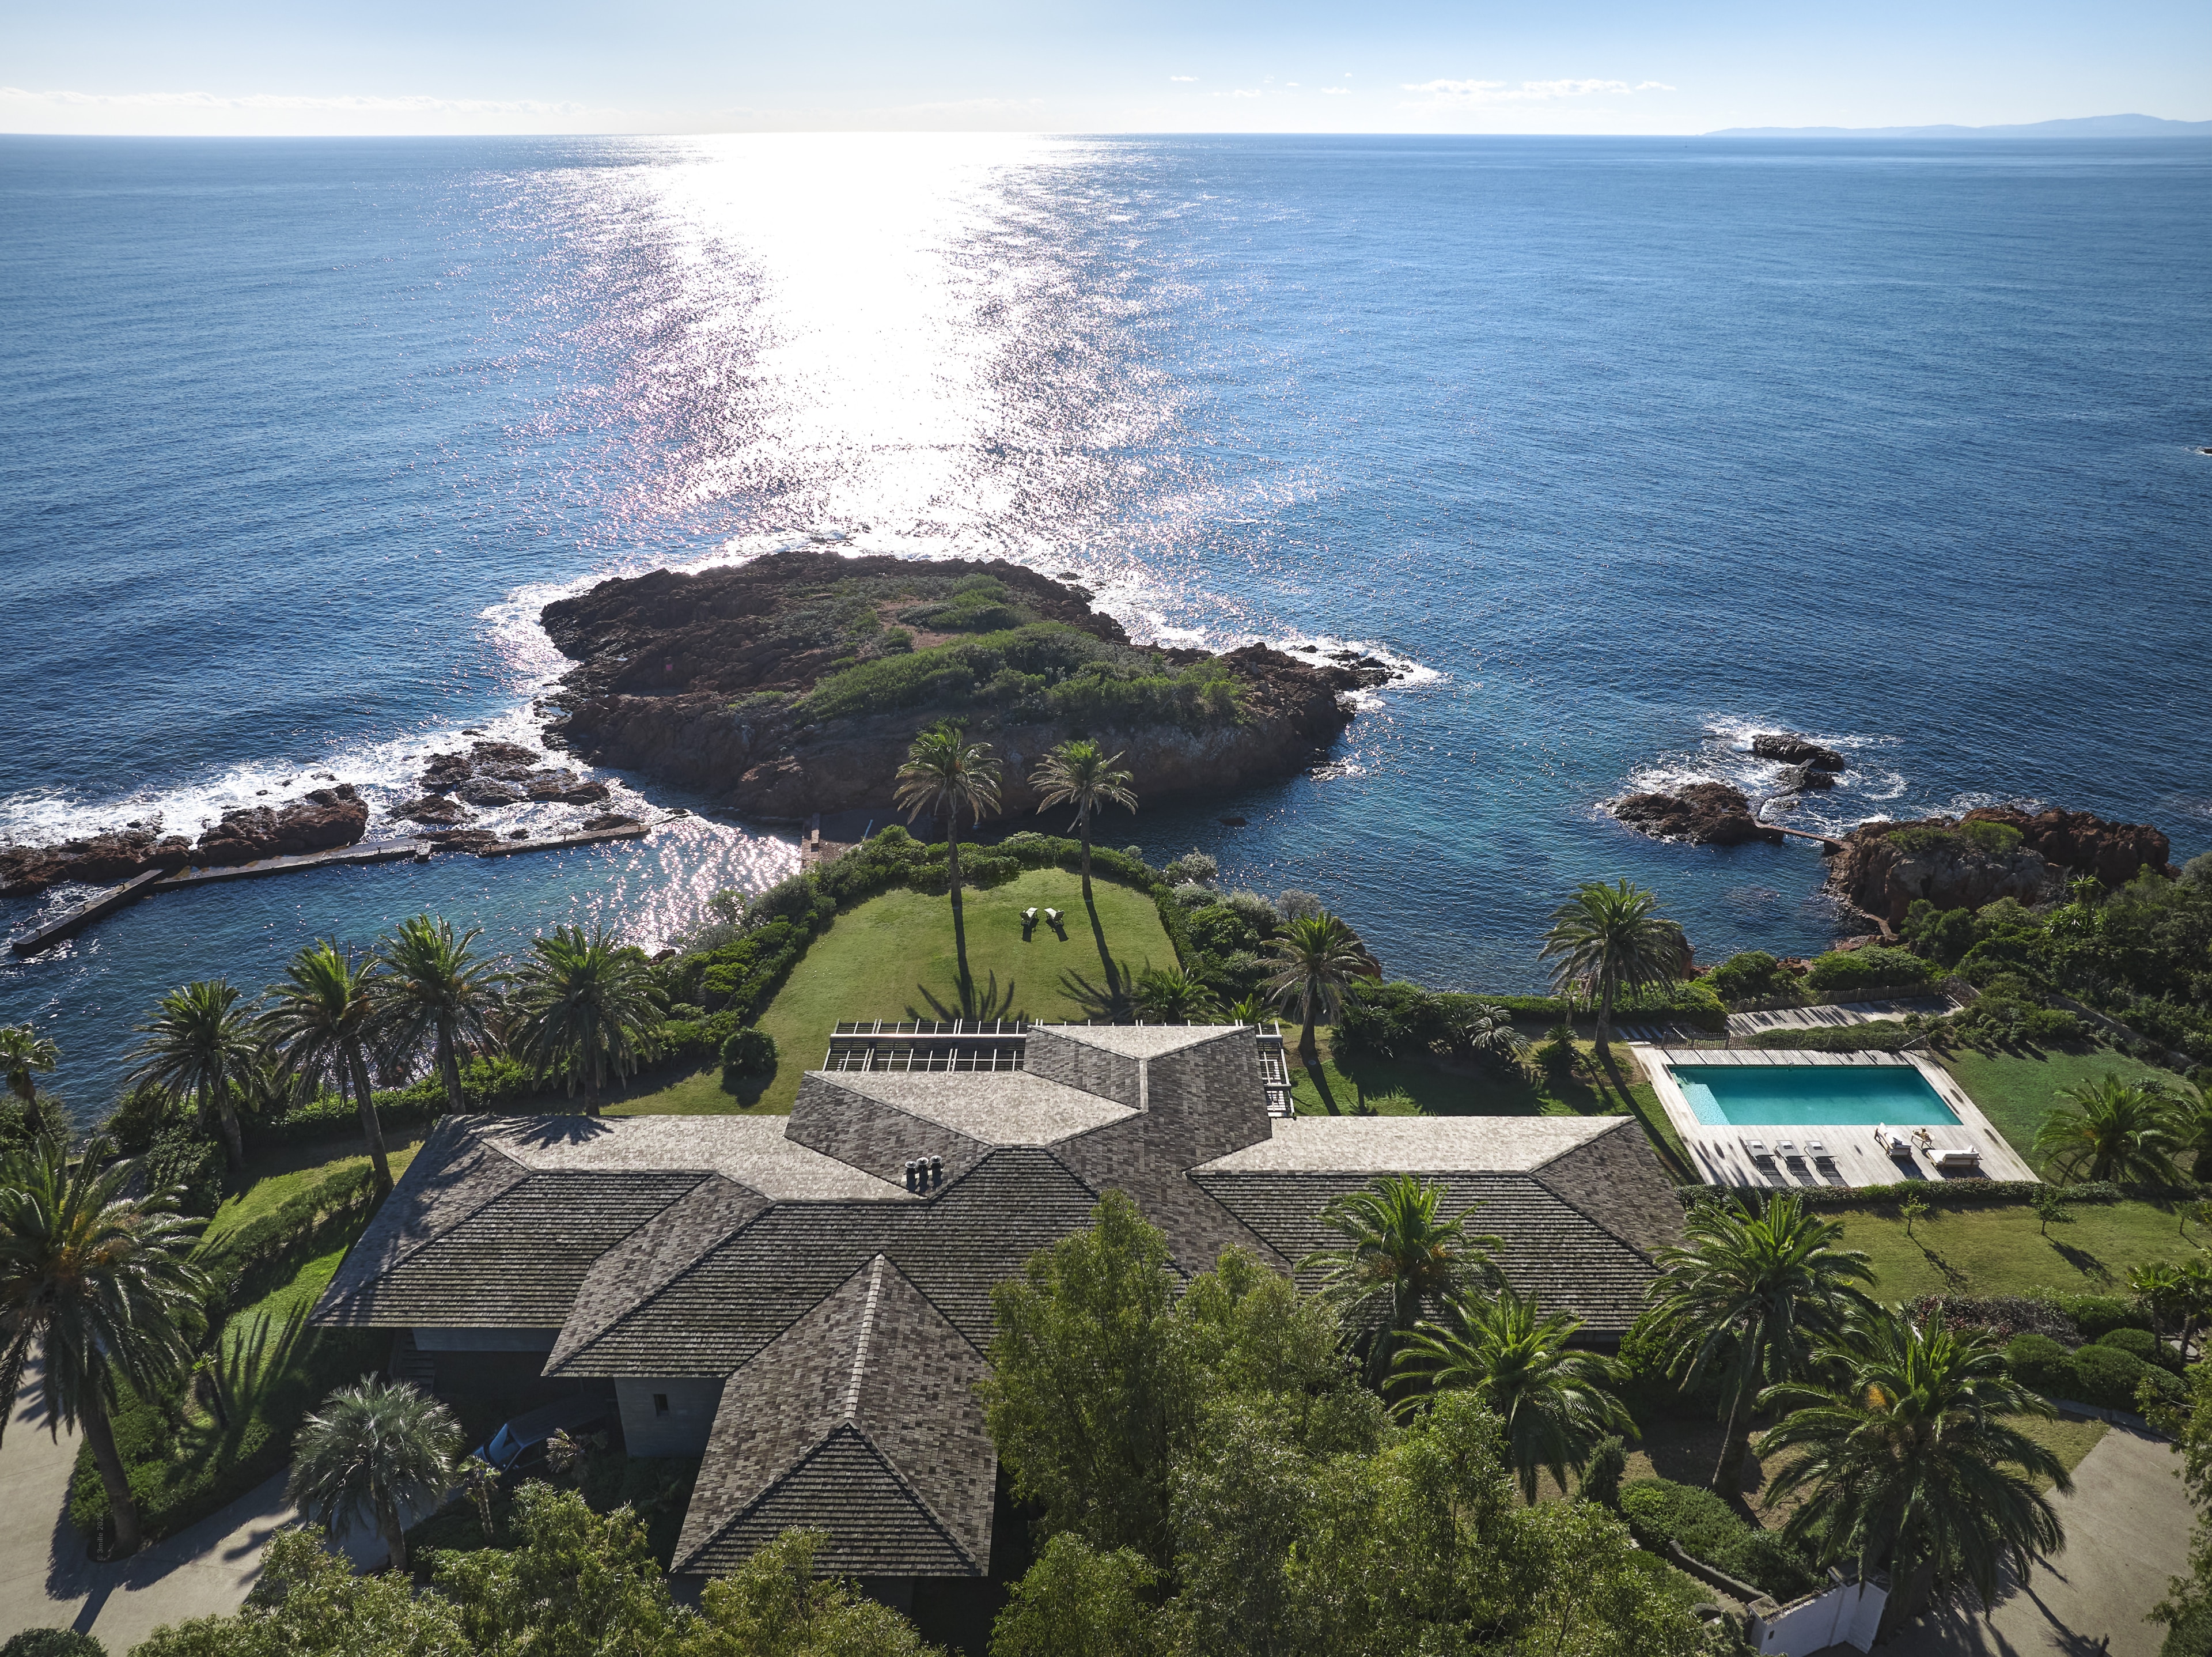 The French Riviera Luxury Real Estate Boom | Beauchamp